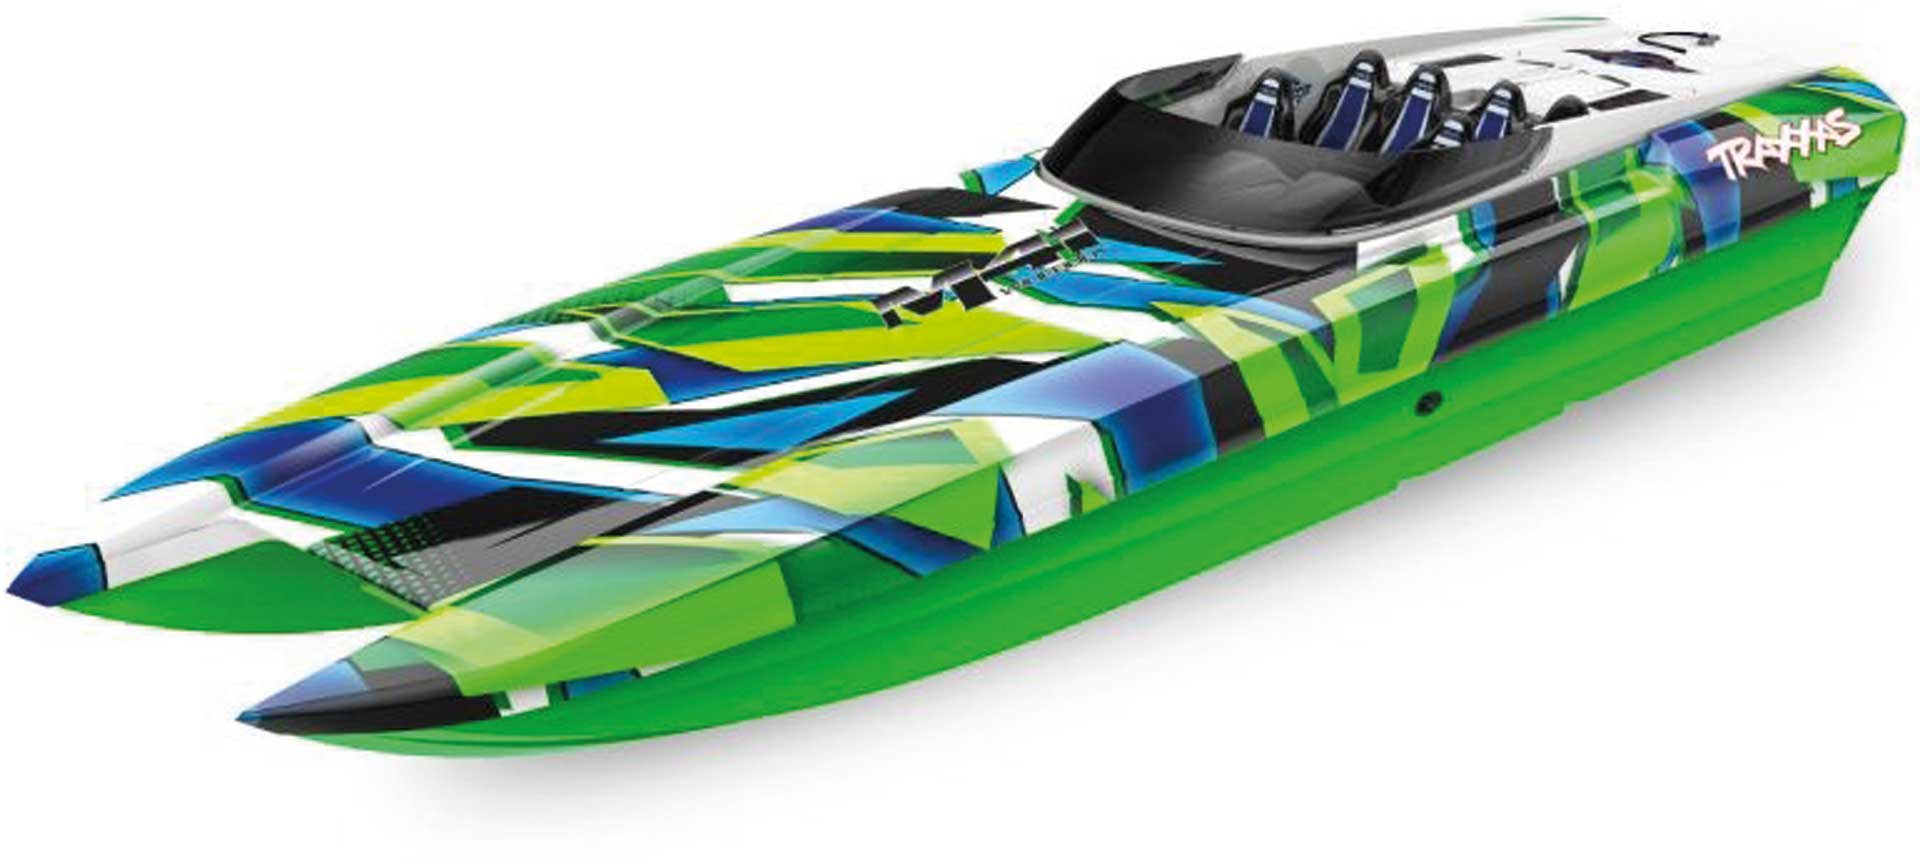 TRAXXAS DCB M41 GREEN/BLUE 40INCH WITHOUT BATTERY/CHARGER BL-CATAMARAN RACING BOAT BRUSHLESS